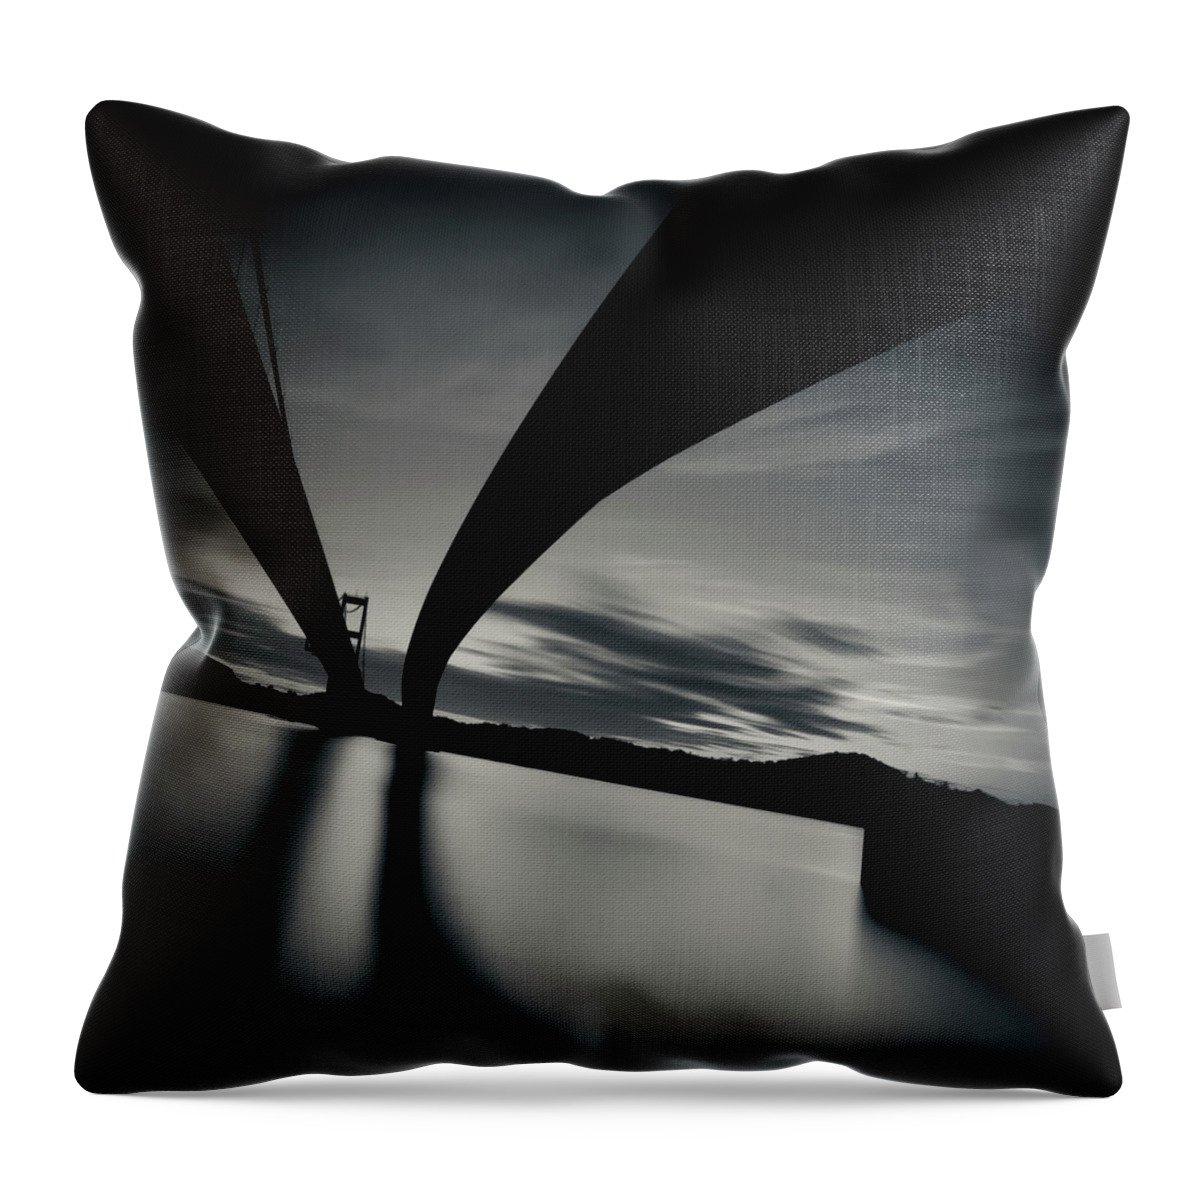 Tranquility Throw Pillow featuring the photograph Twin Bridges by Petterphoto Petter.junk@gmail.com